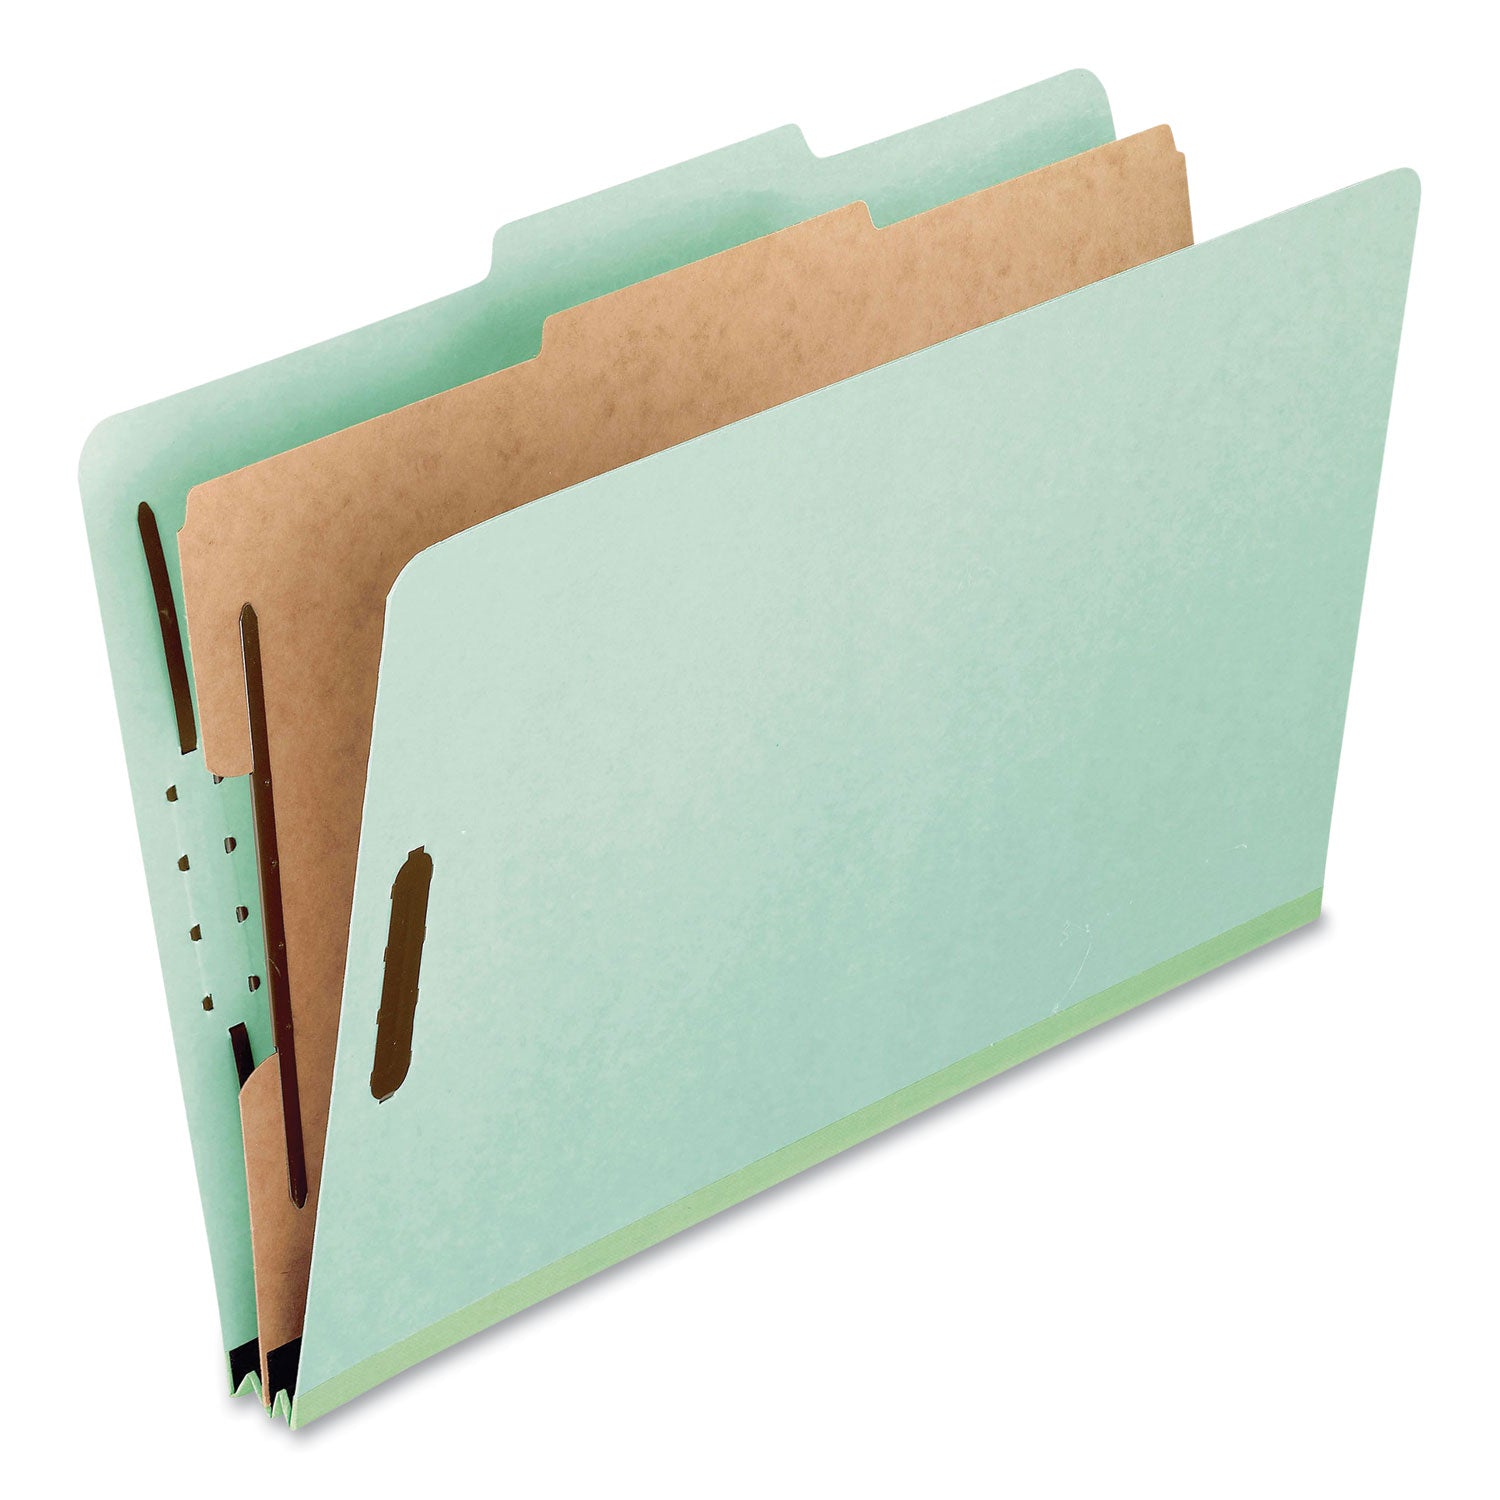 four-section-pressboard-classification-folders-2-expansion-1-divider-4-fasteners-legal-size-light-green-10-box_pfx17175ee - 1